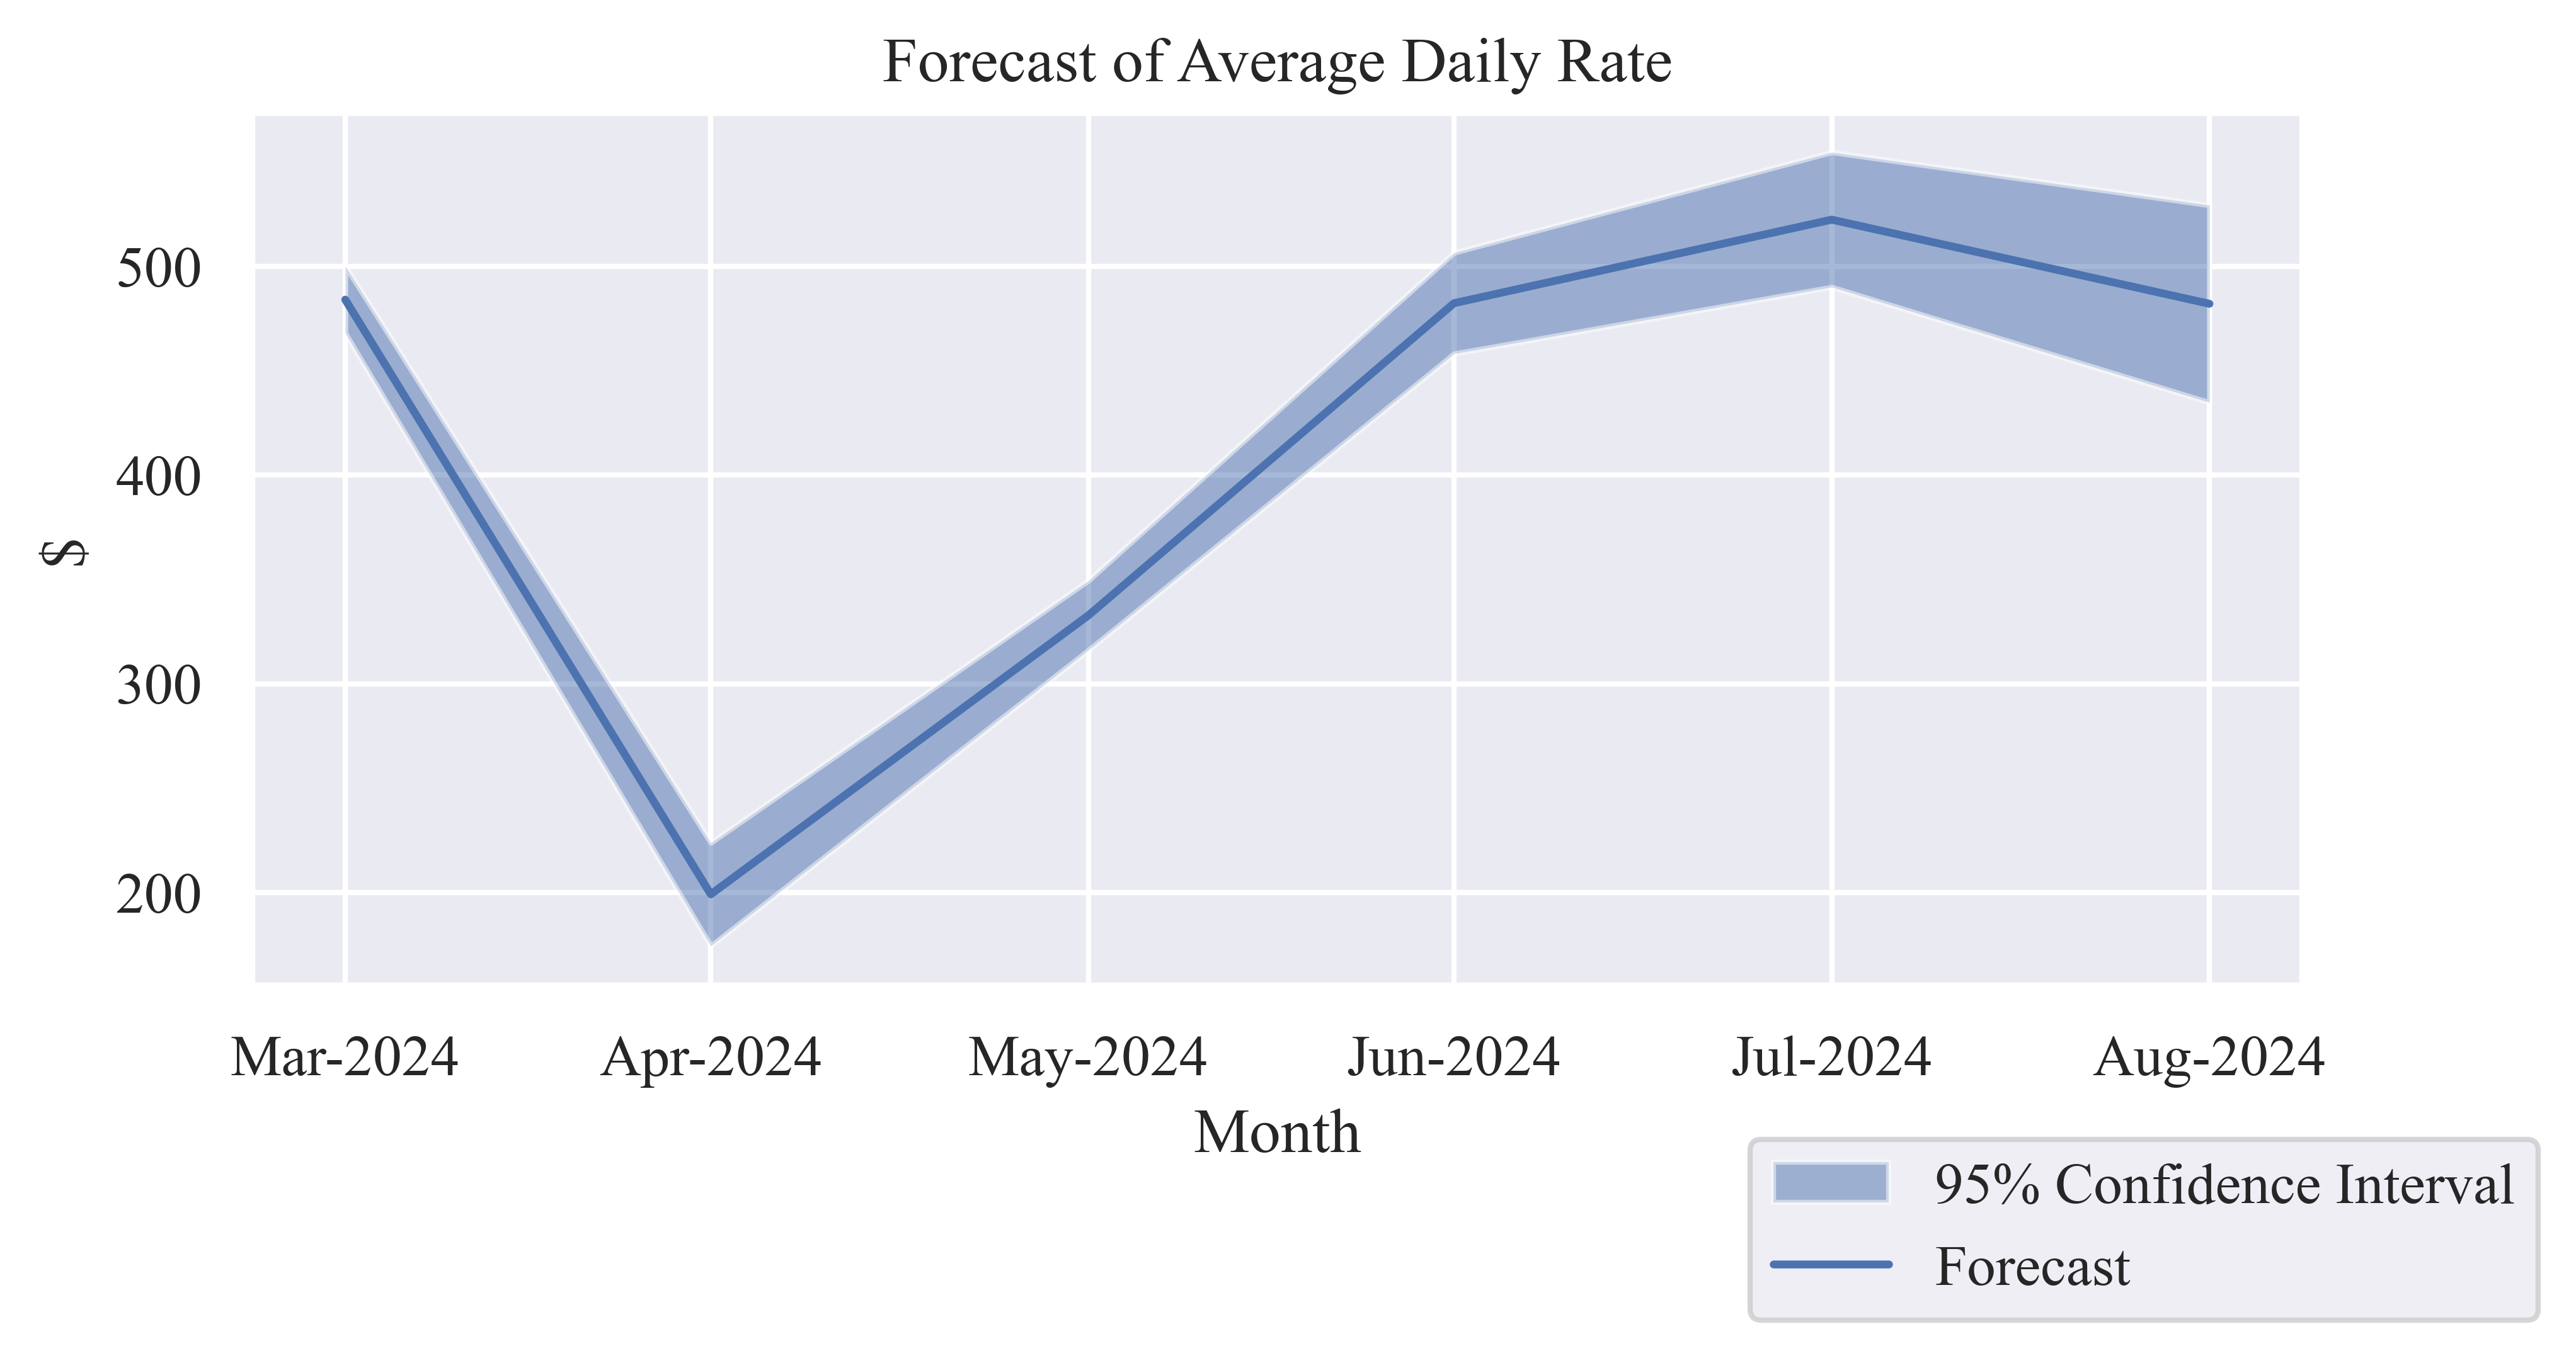 Table 2: Forecast of Monthly Average Daily Rate